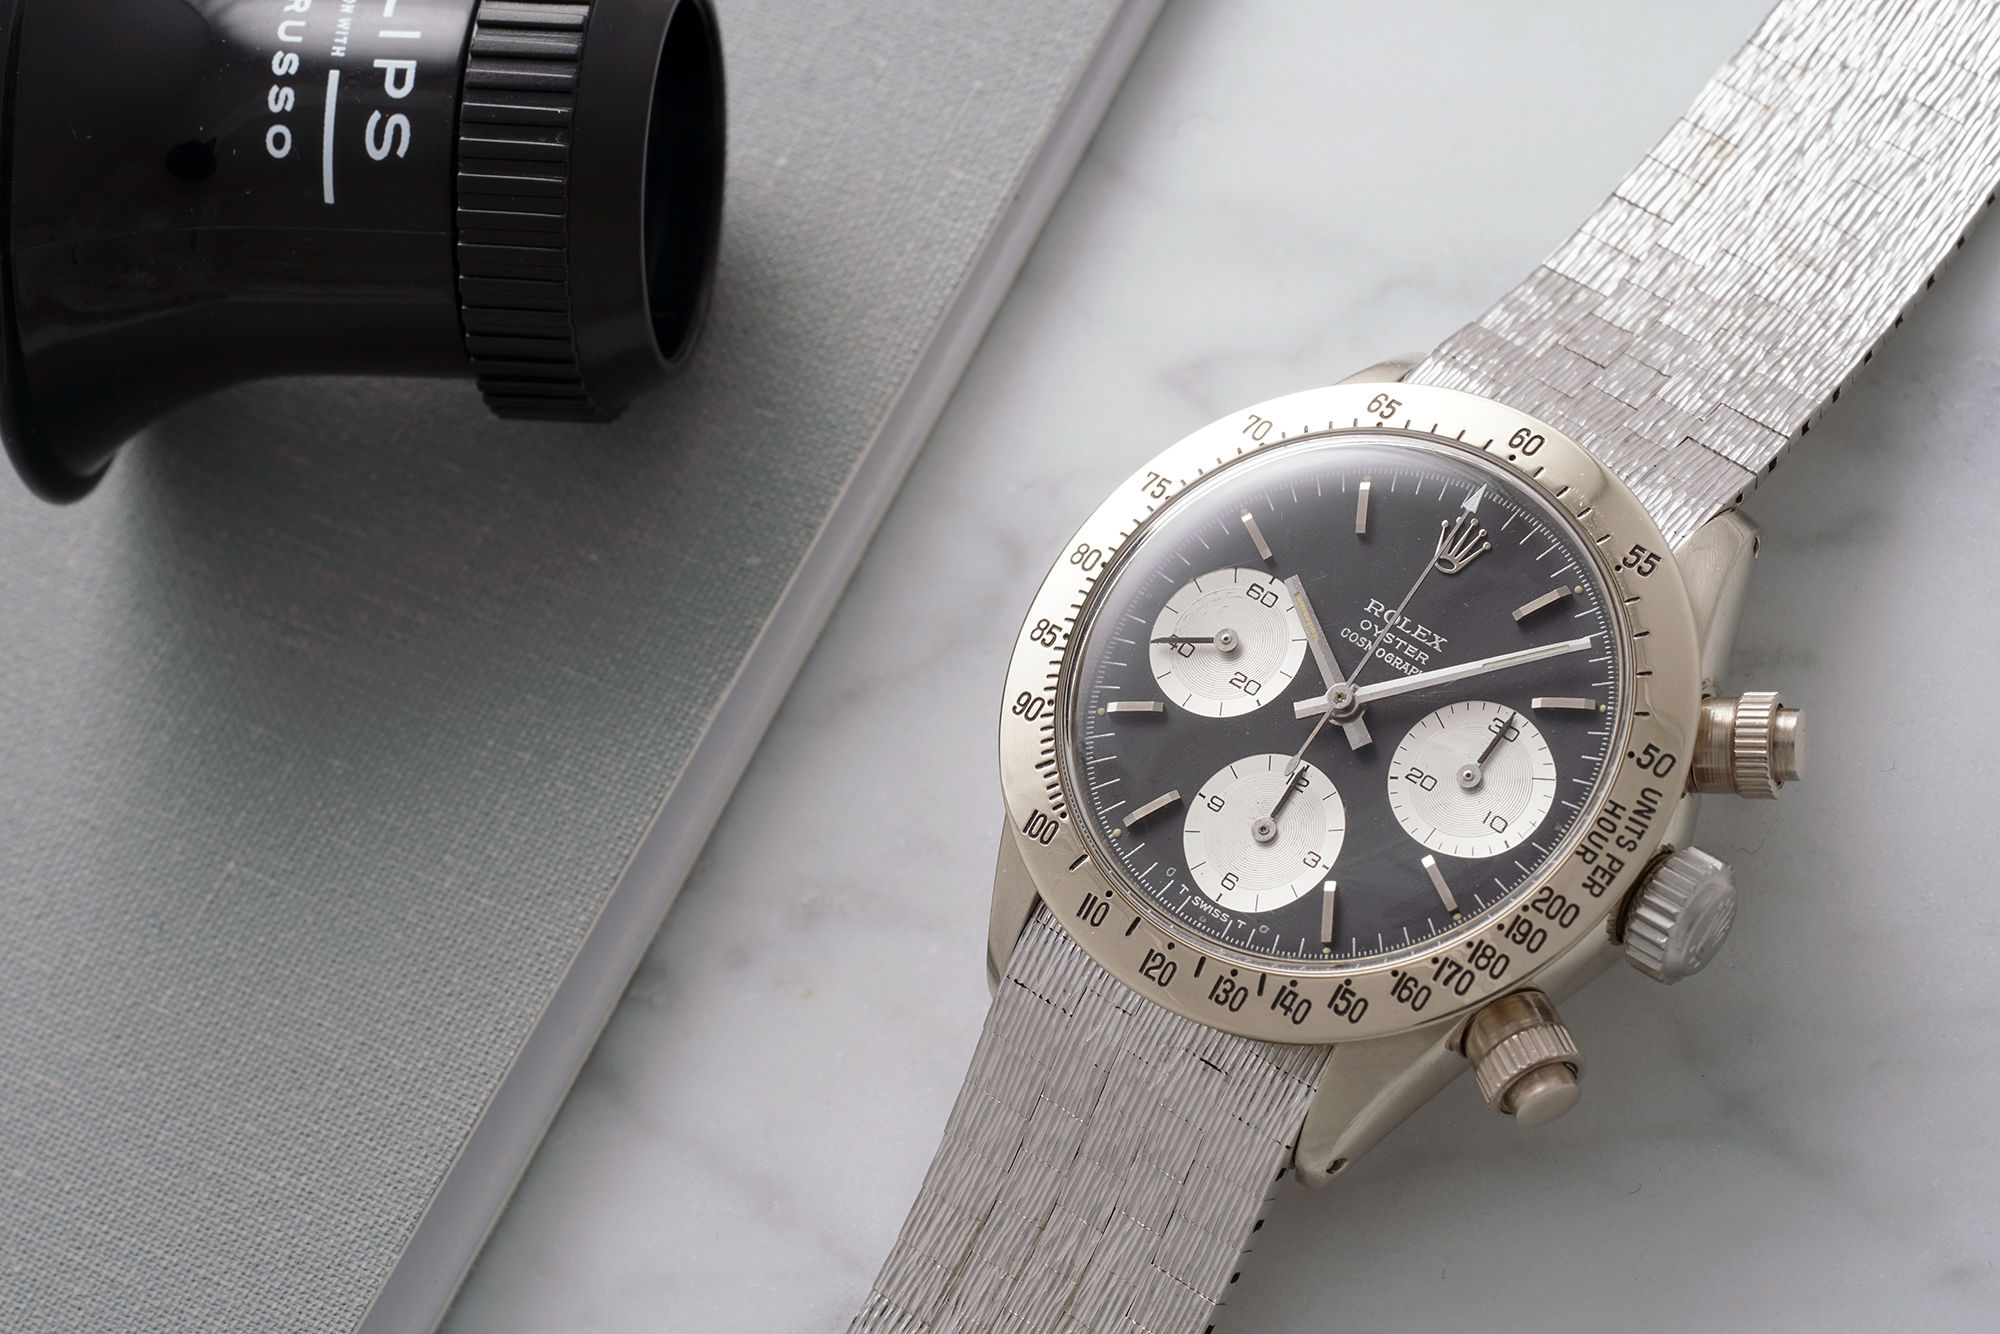 This extremely rare white gold Rolex Daytona is hitting the auction block